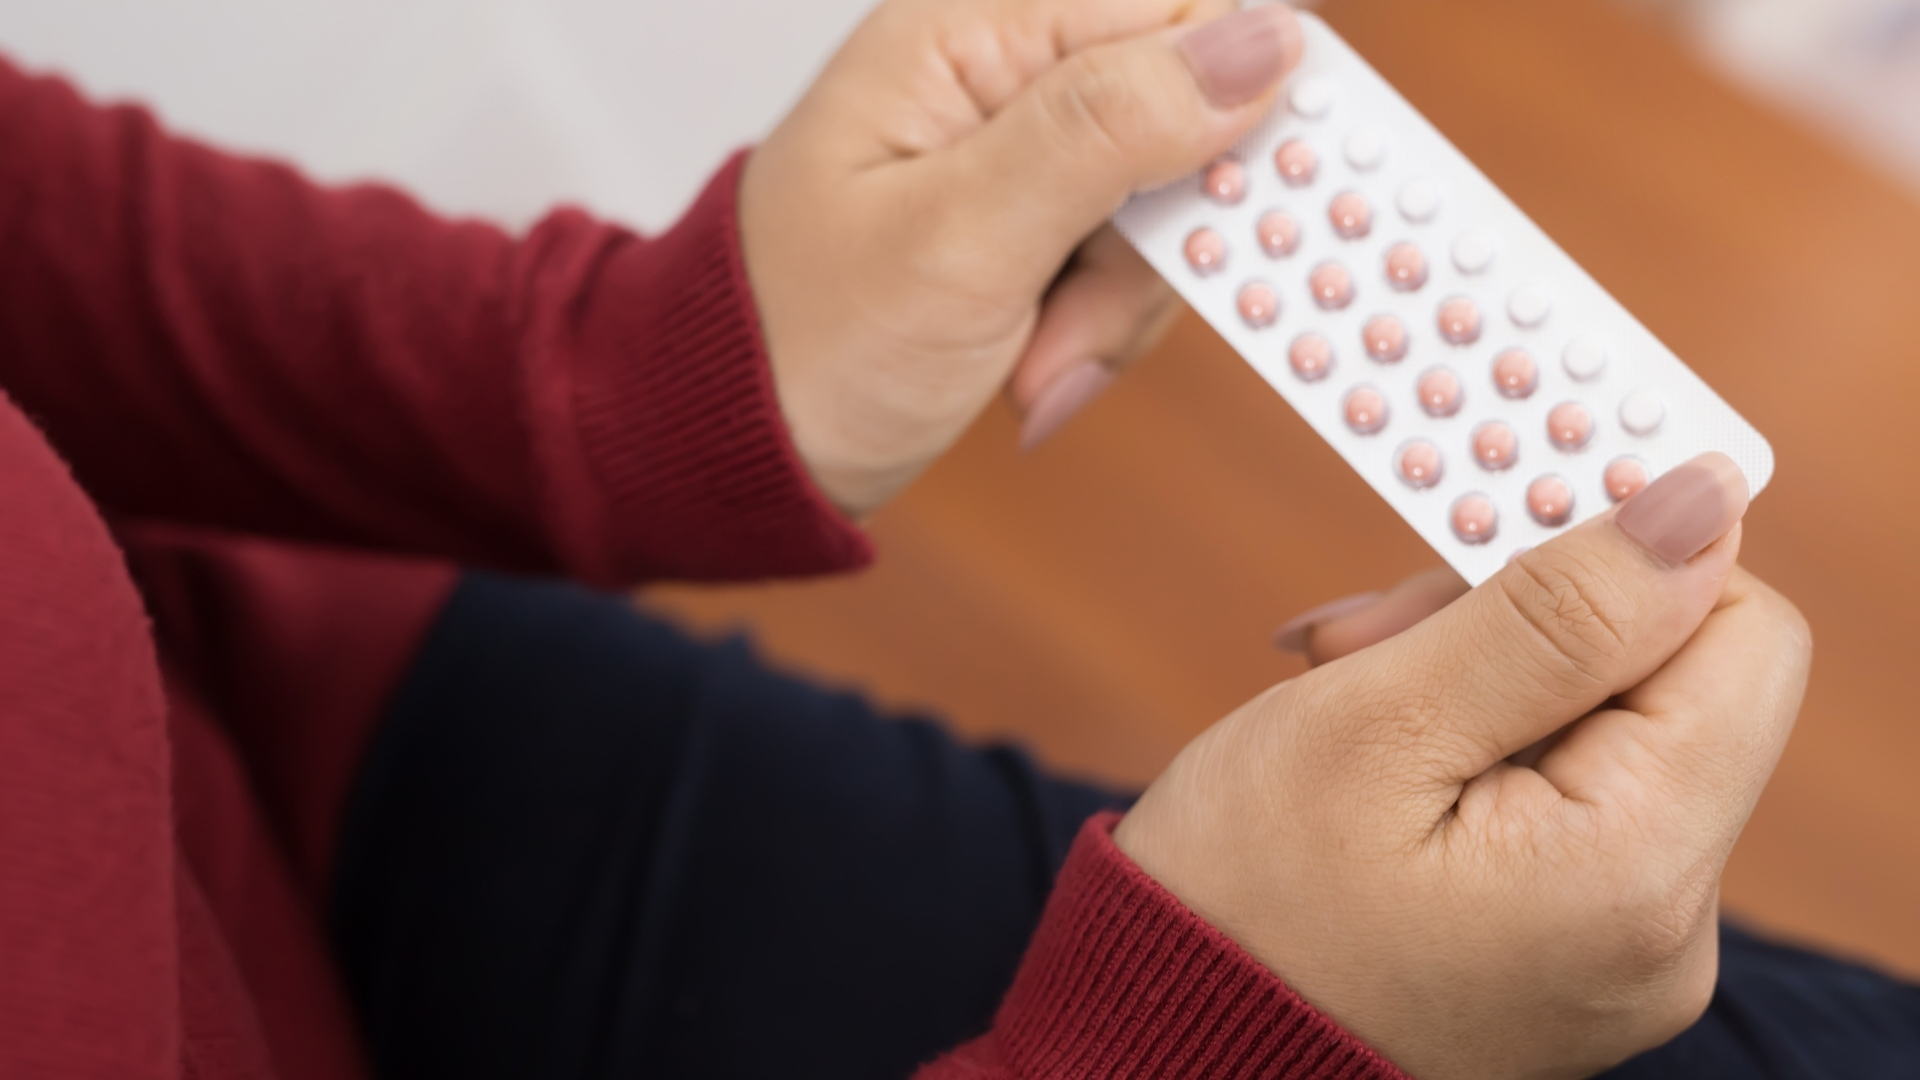 When can I expect my periods after stopping birth control pills